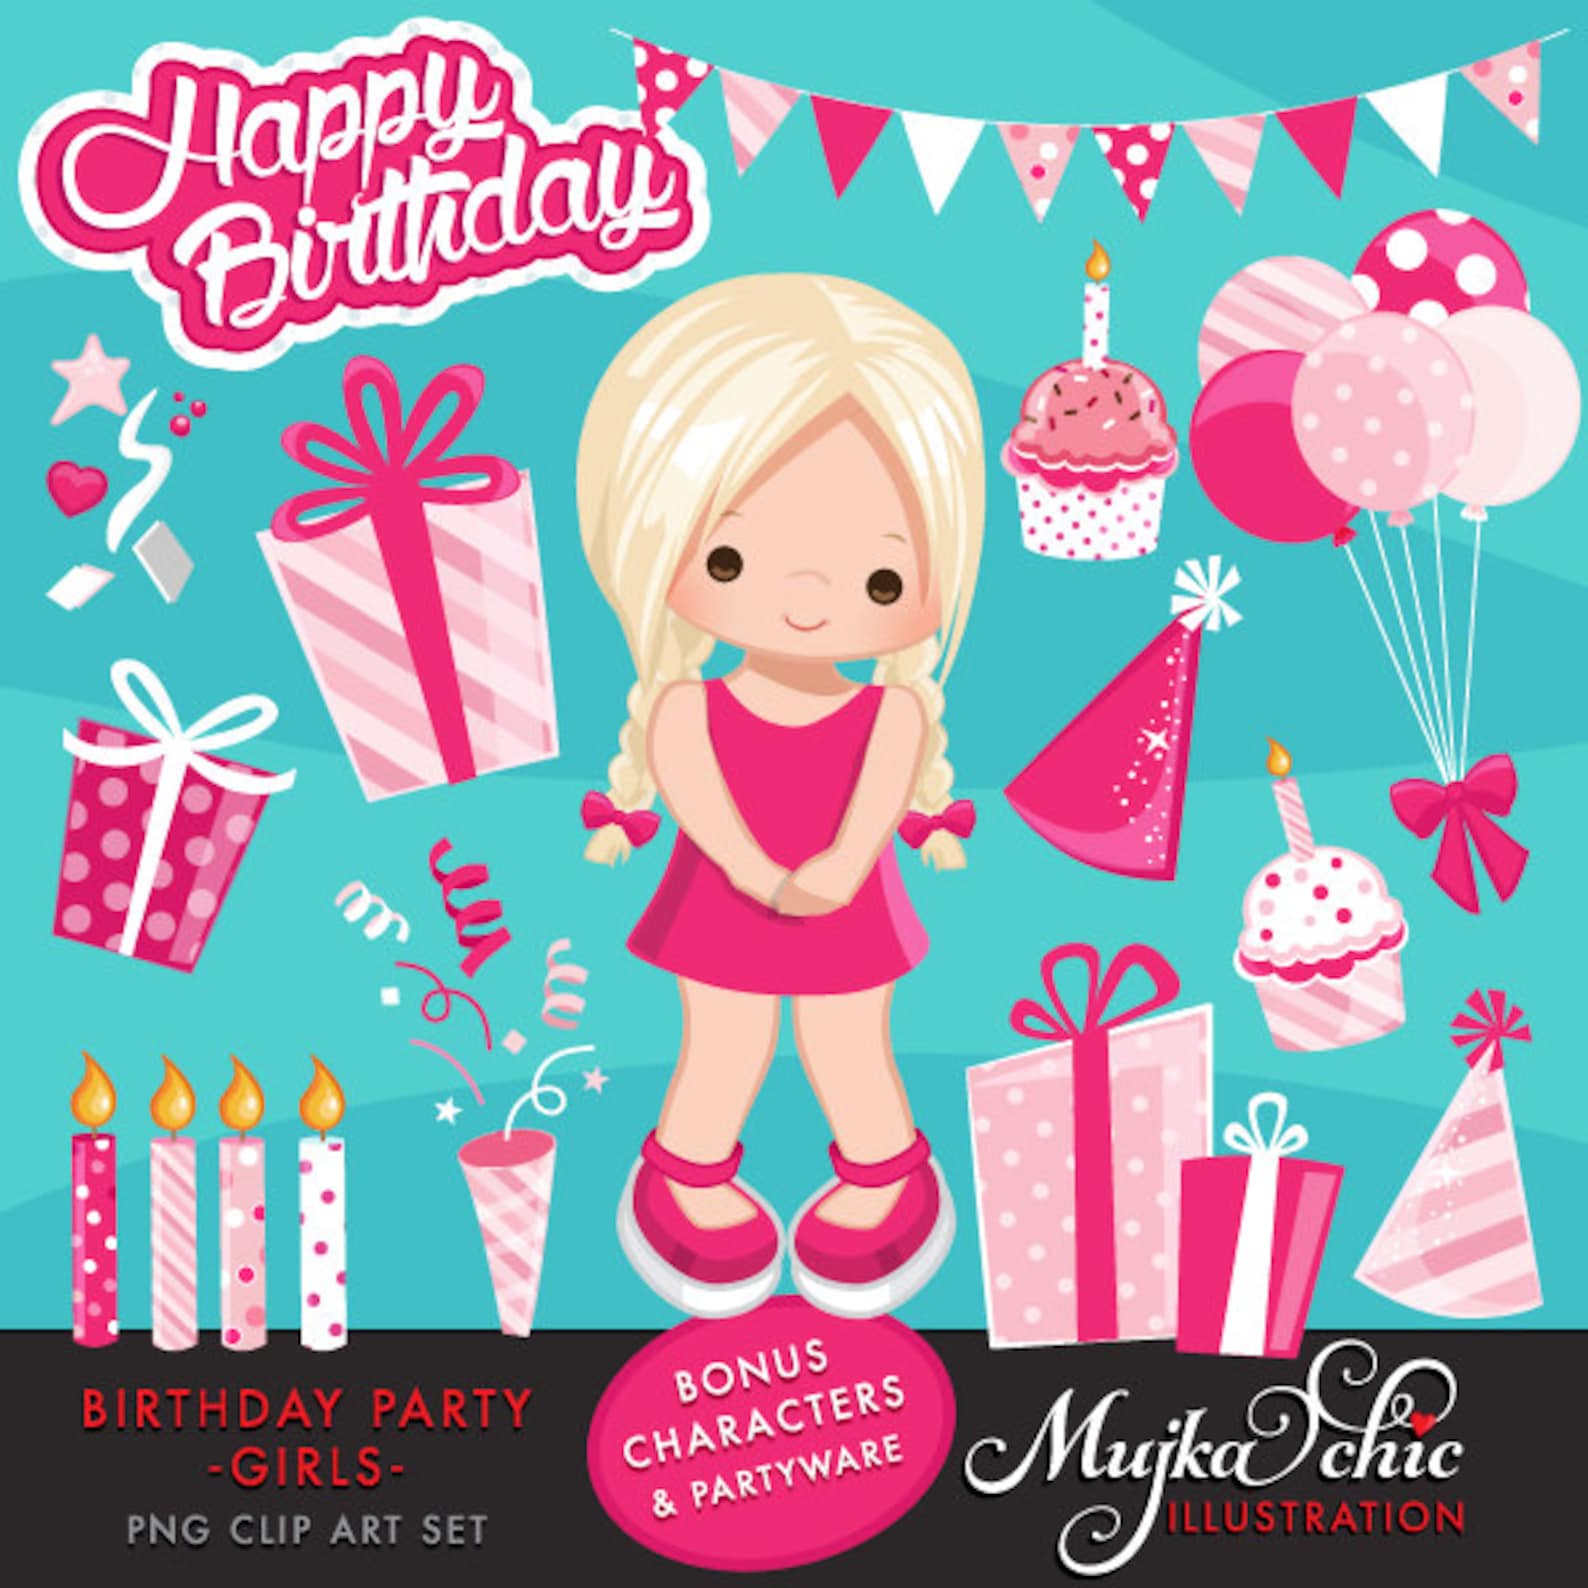 Birthday characters. Pink girl Birthday Party. Birthday girl. Birthday Party Clipart. Character birthday